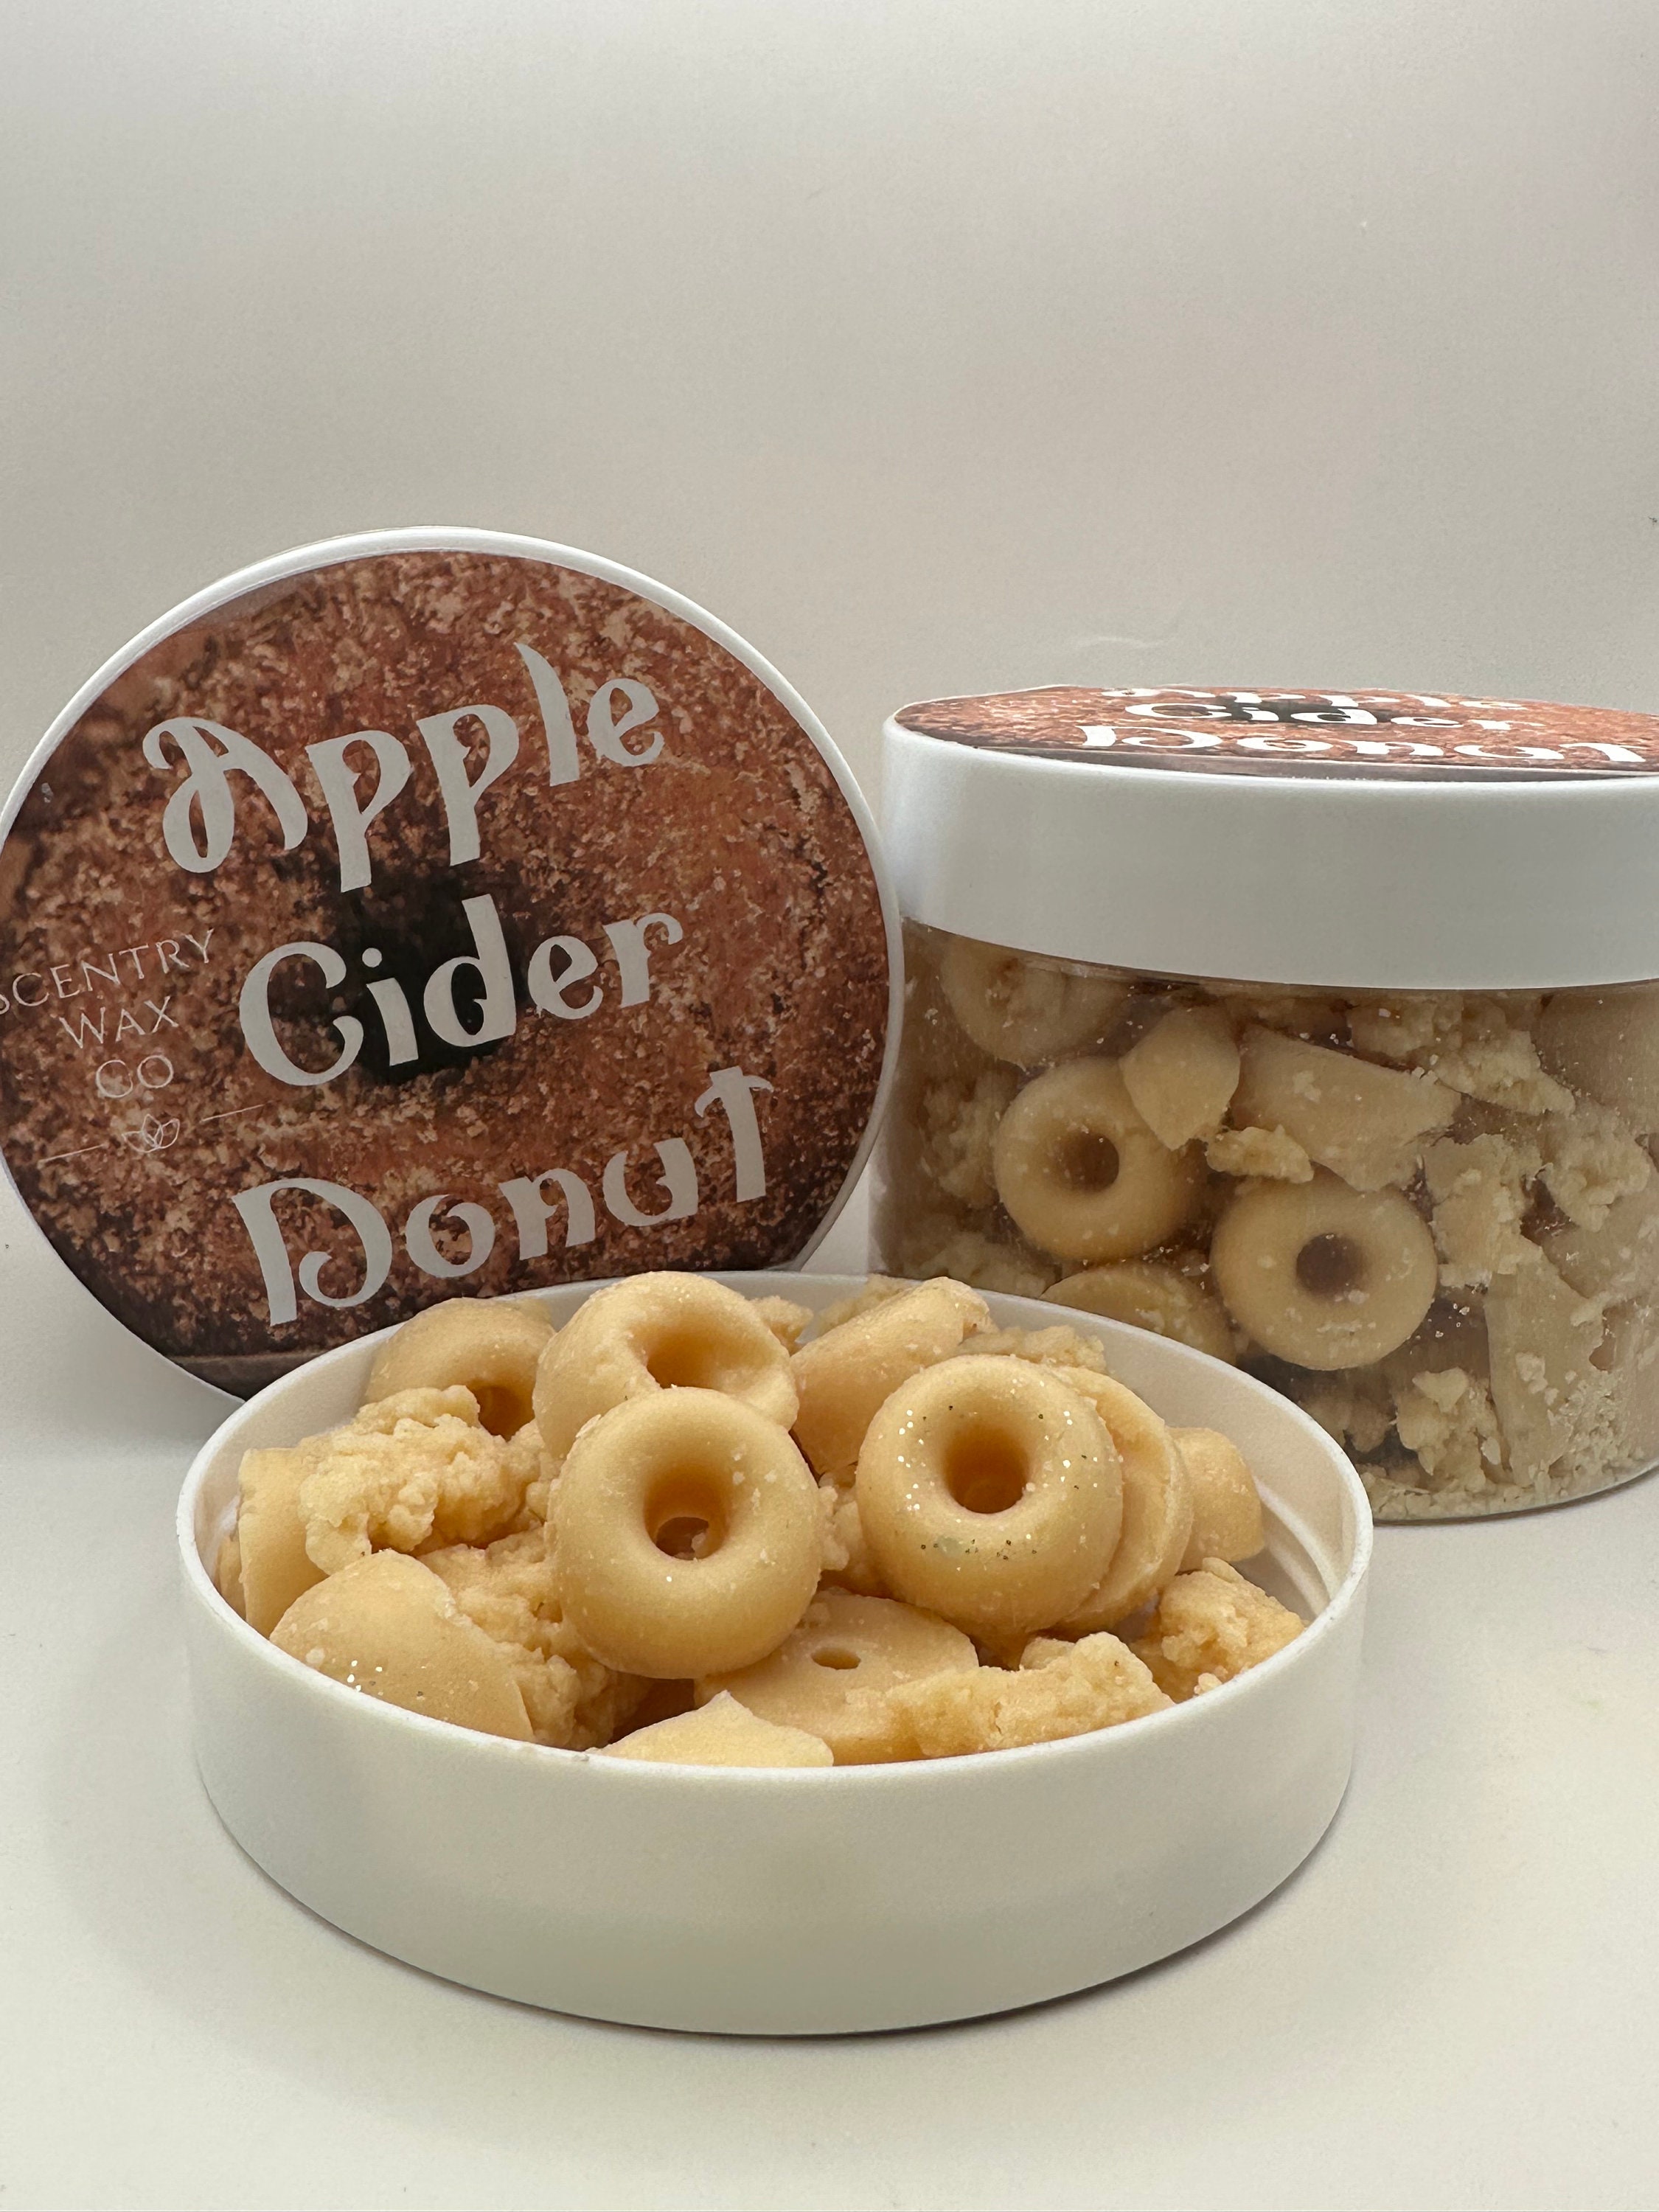 Apple Cider Donut 6 Oz Beeswax Wax Melts, Food Scented Tart Melts, All  Natural Scented Wax Tarts for Wax Warmer, Wickless Non-toxic Candle 